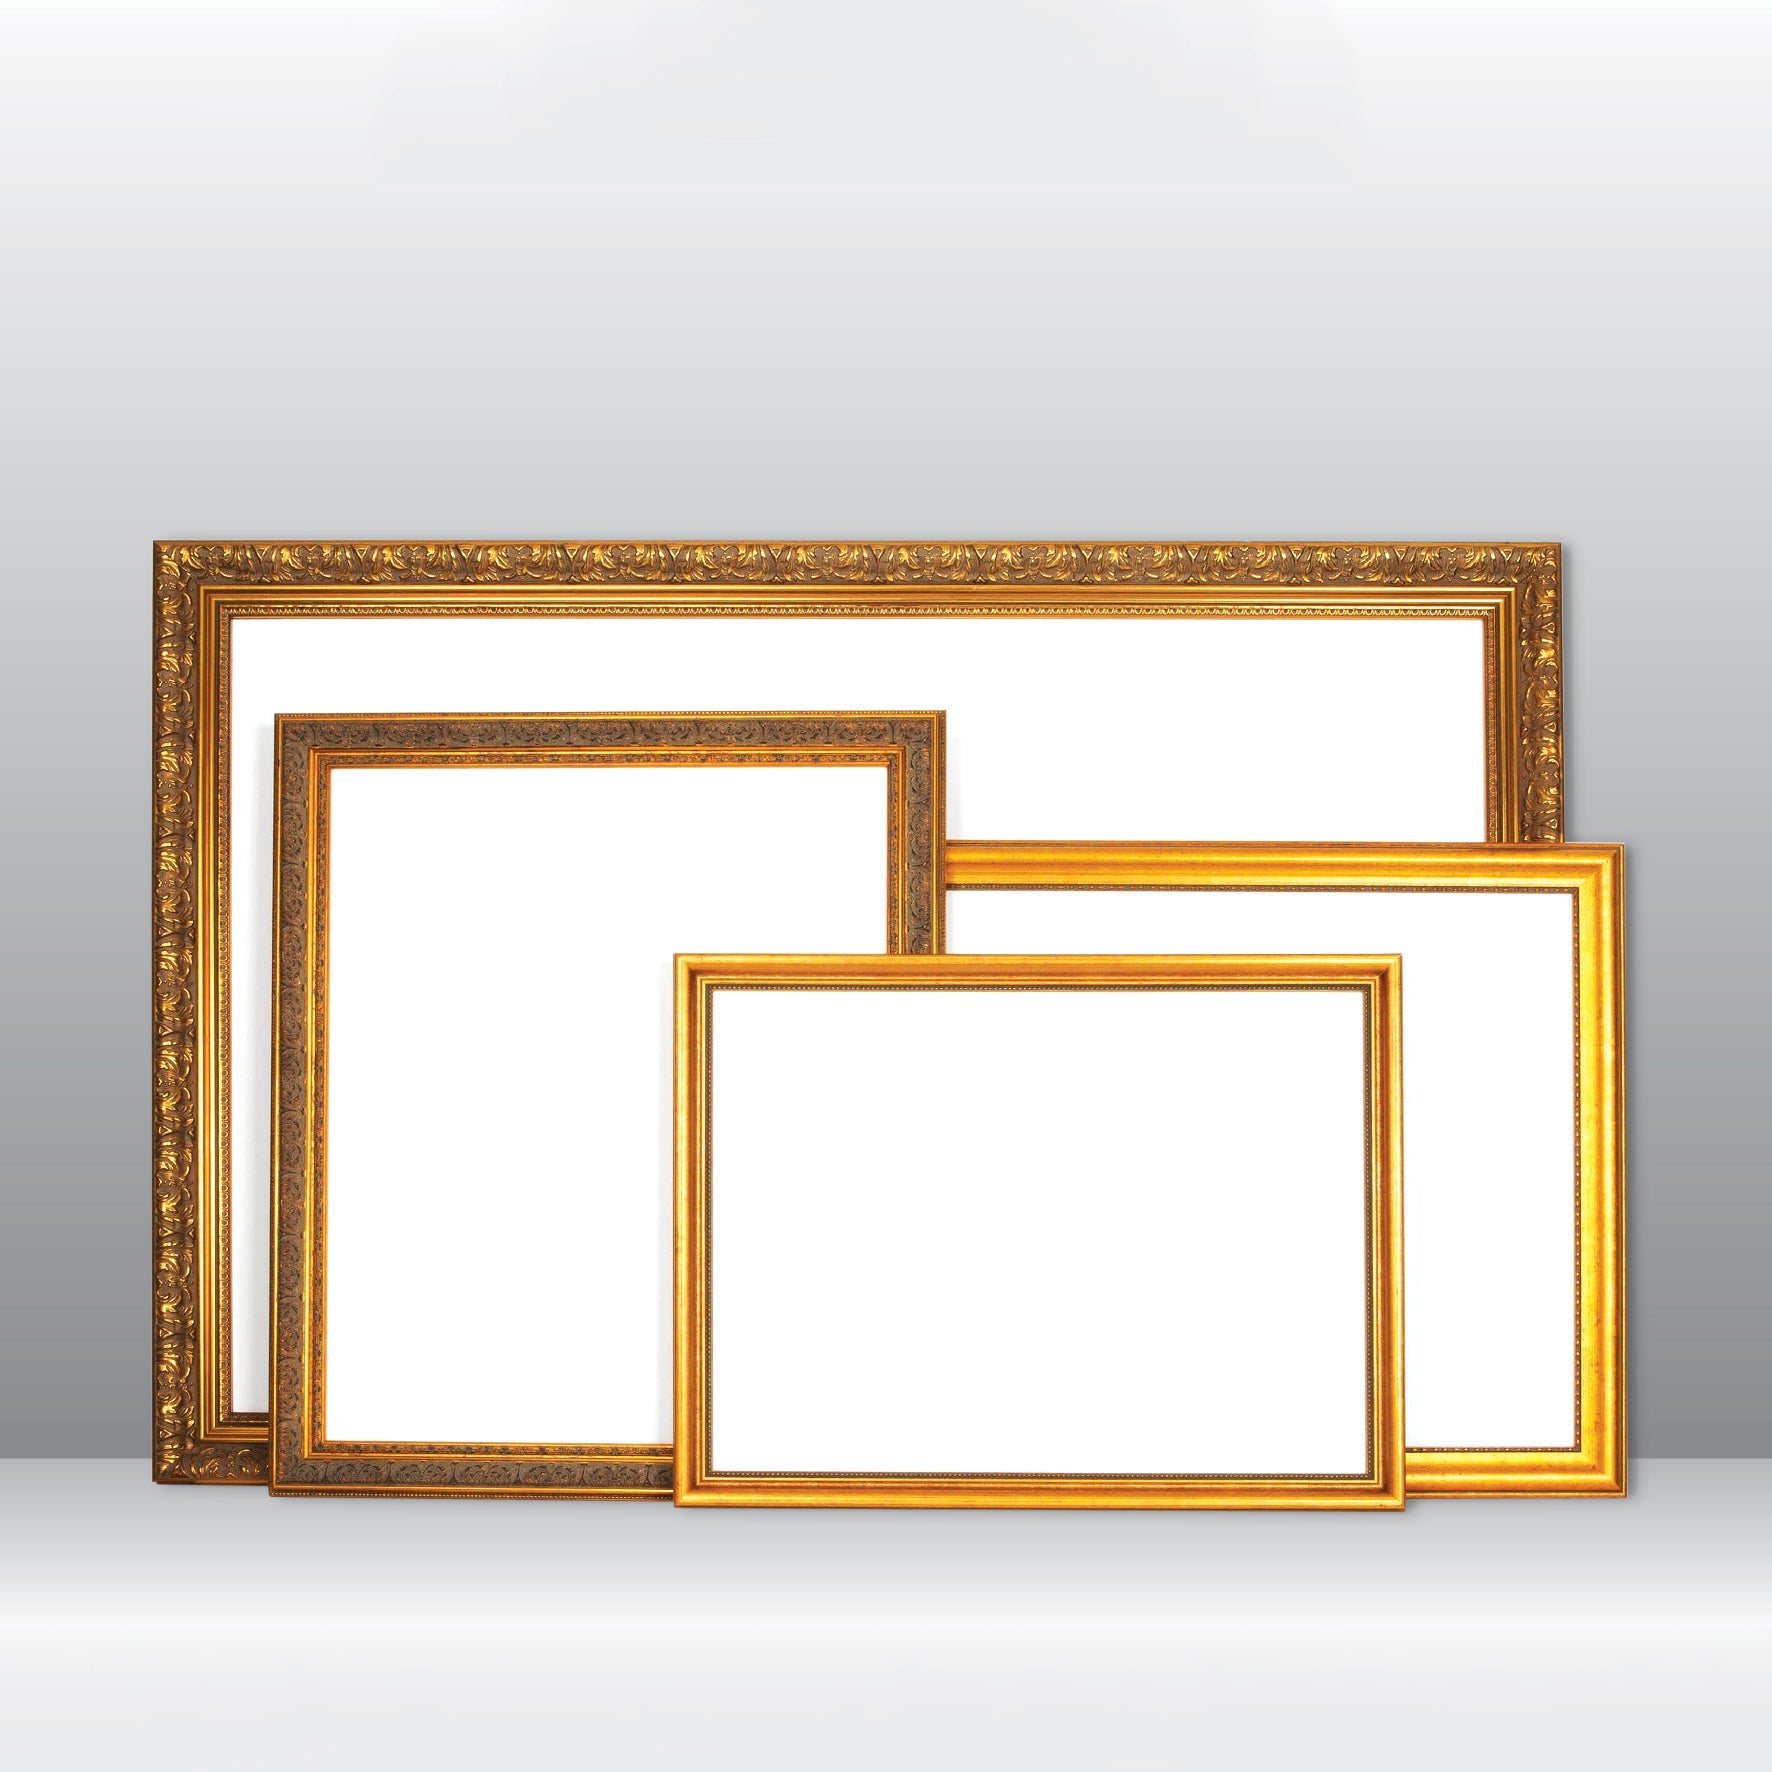 Wooden Ornate Gold Classic Gold Photo Picture Frame for Wall Art Work A0, A1, A2, A3, A4